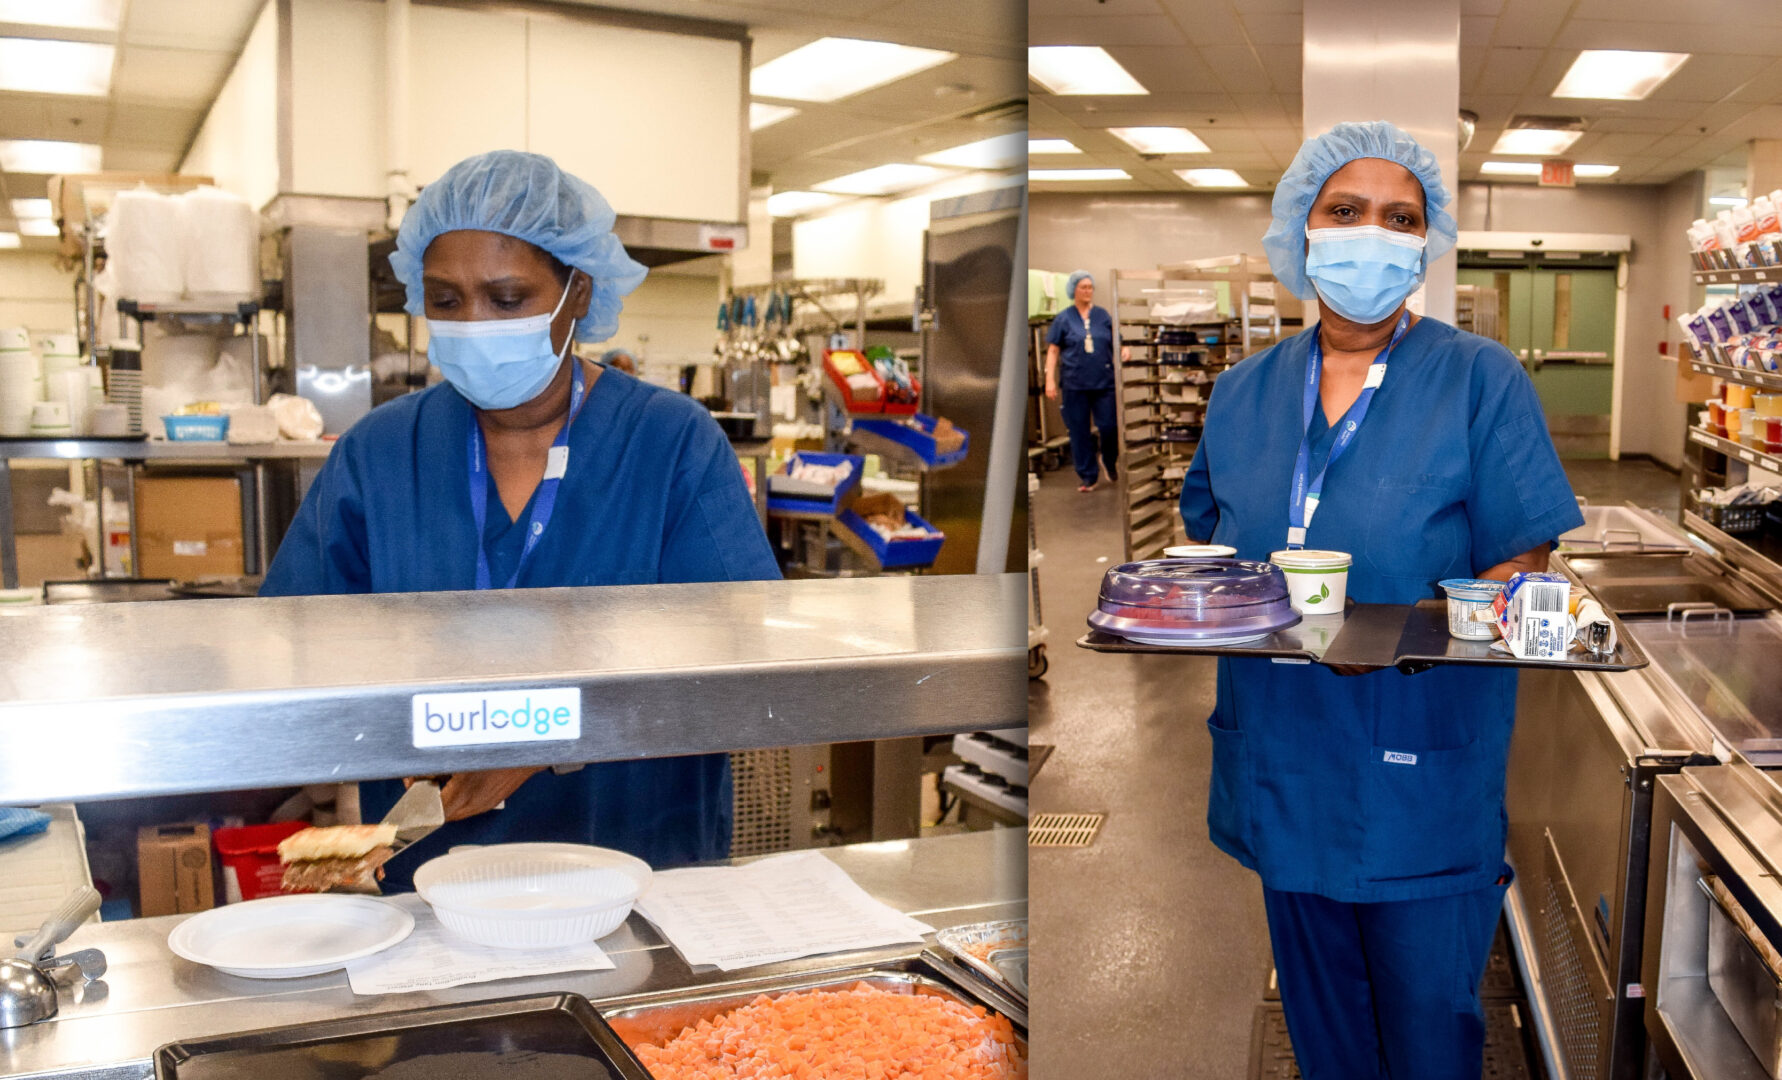 Photo of Karen Julien, a food service assistant at oak valley health, she is wearing a face and hair mask in a blue gown. The photo is split into two sections, on the left side she is shown to be putting food on a plate from a food counter. On the right side, she is shown holding a tray of food while looking at the camera.